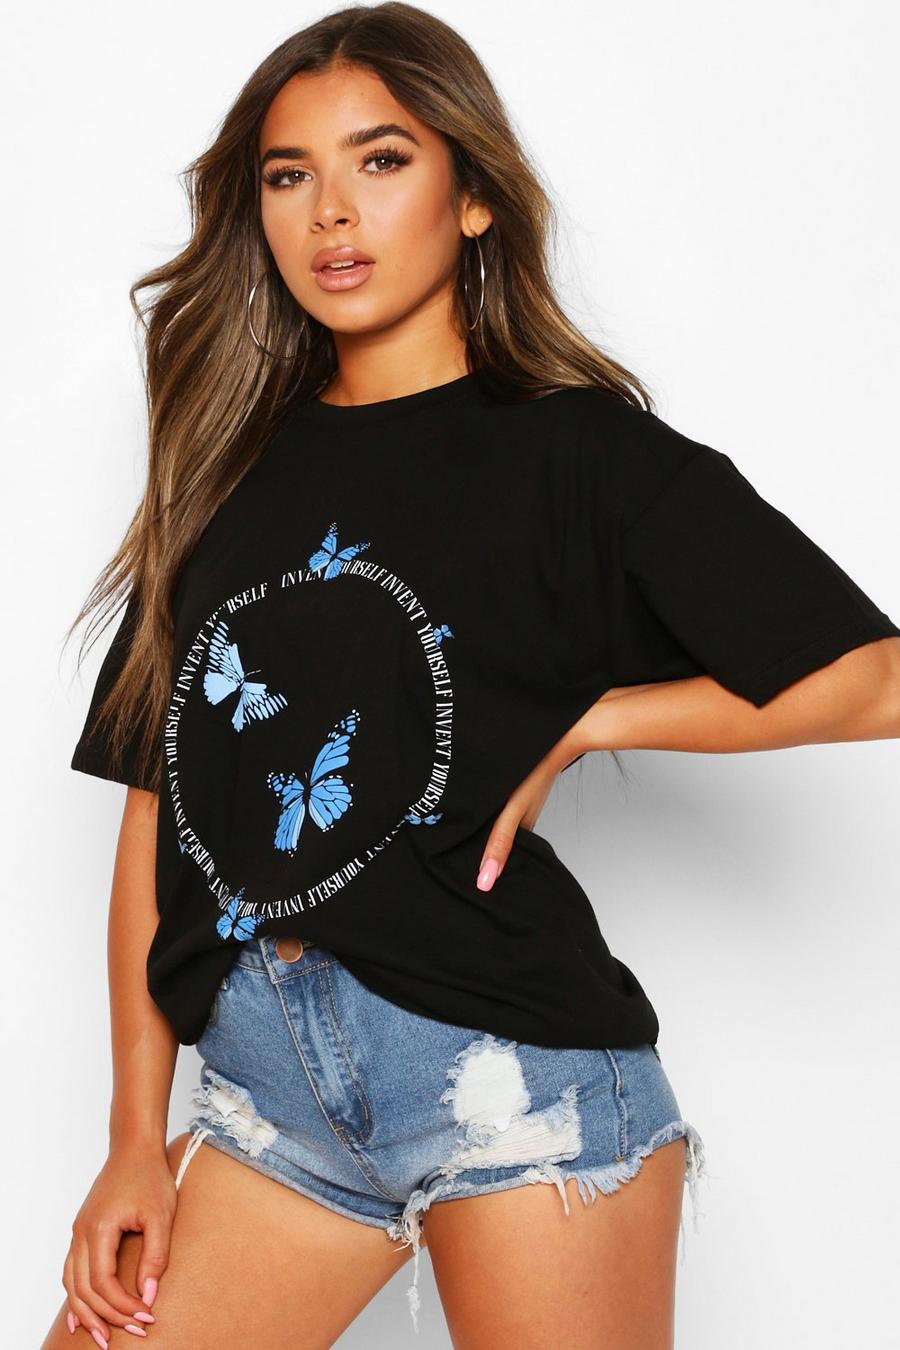 Camiseta con eslogan "Invent Yourself Butterfly" Petite, Negro image number 1